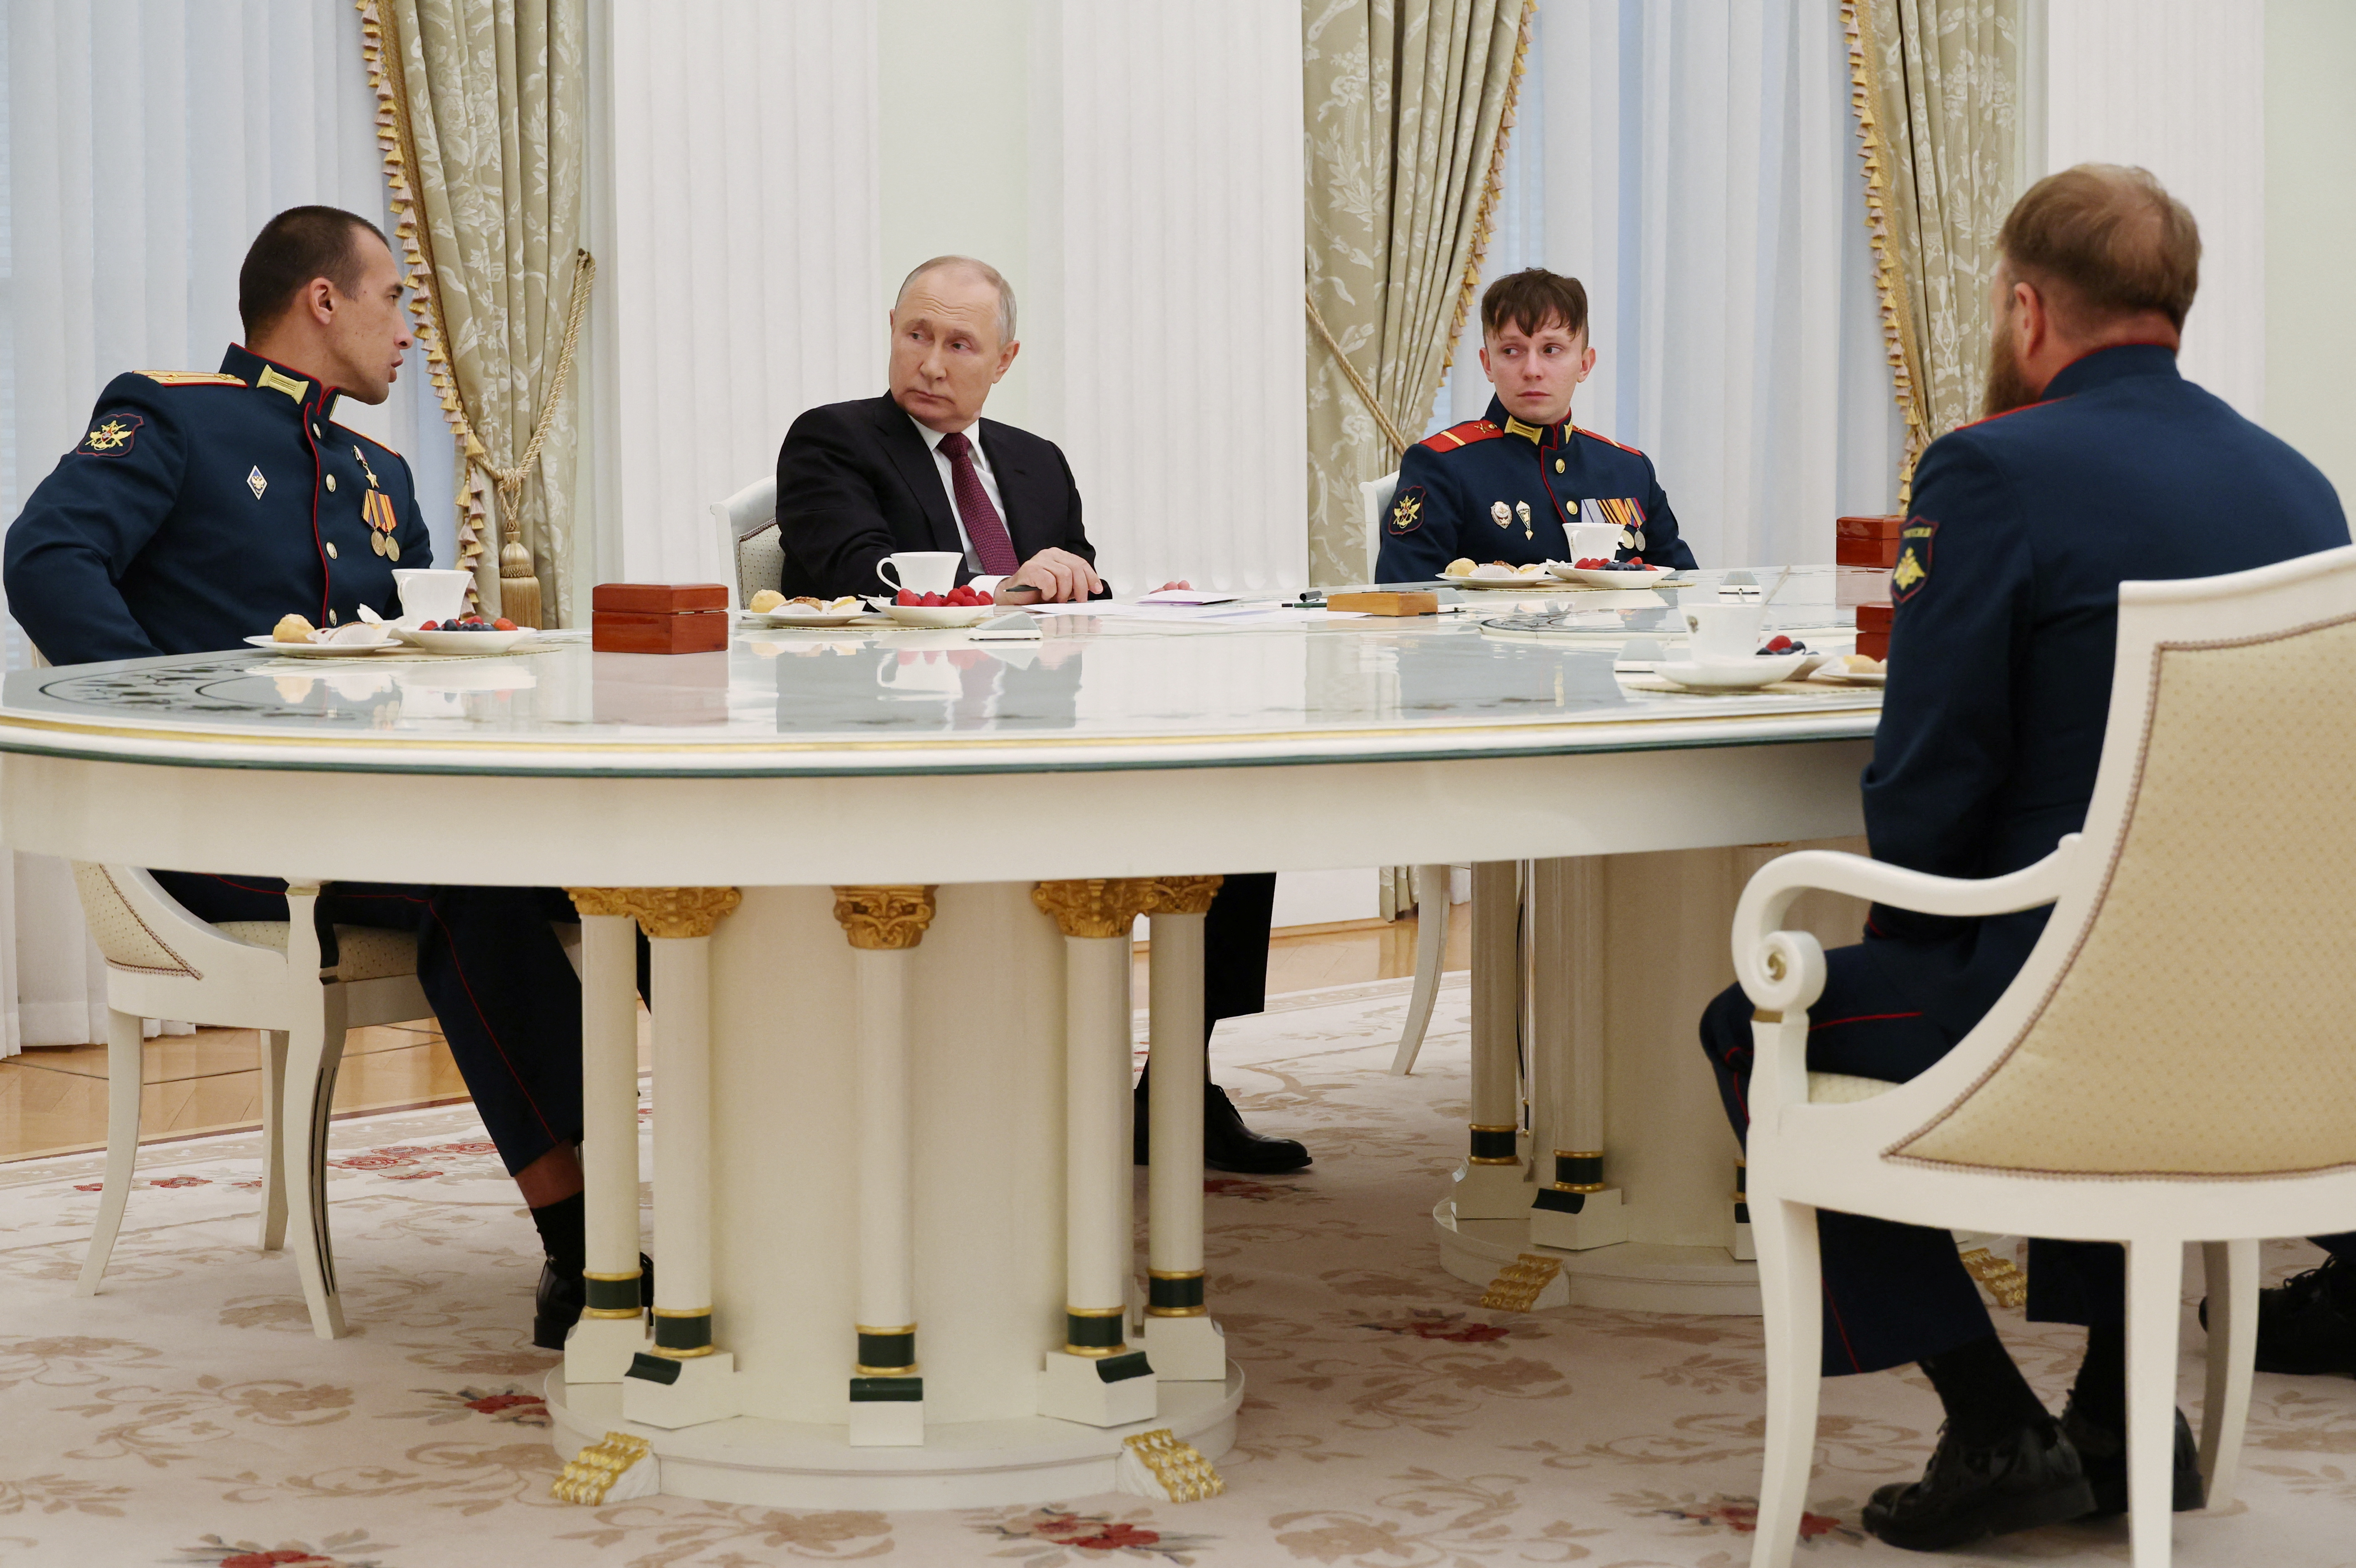 Russian President Putin meets with tank crew in Moscow